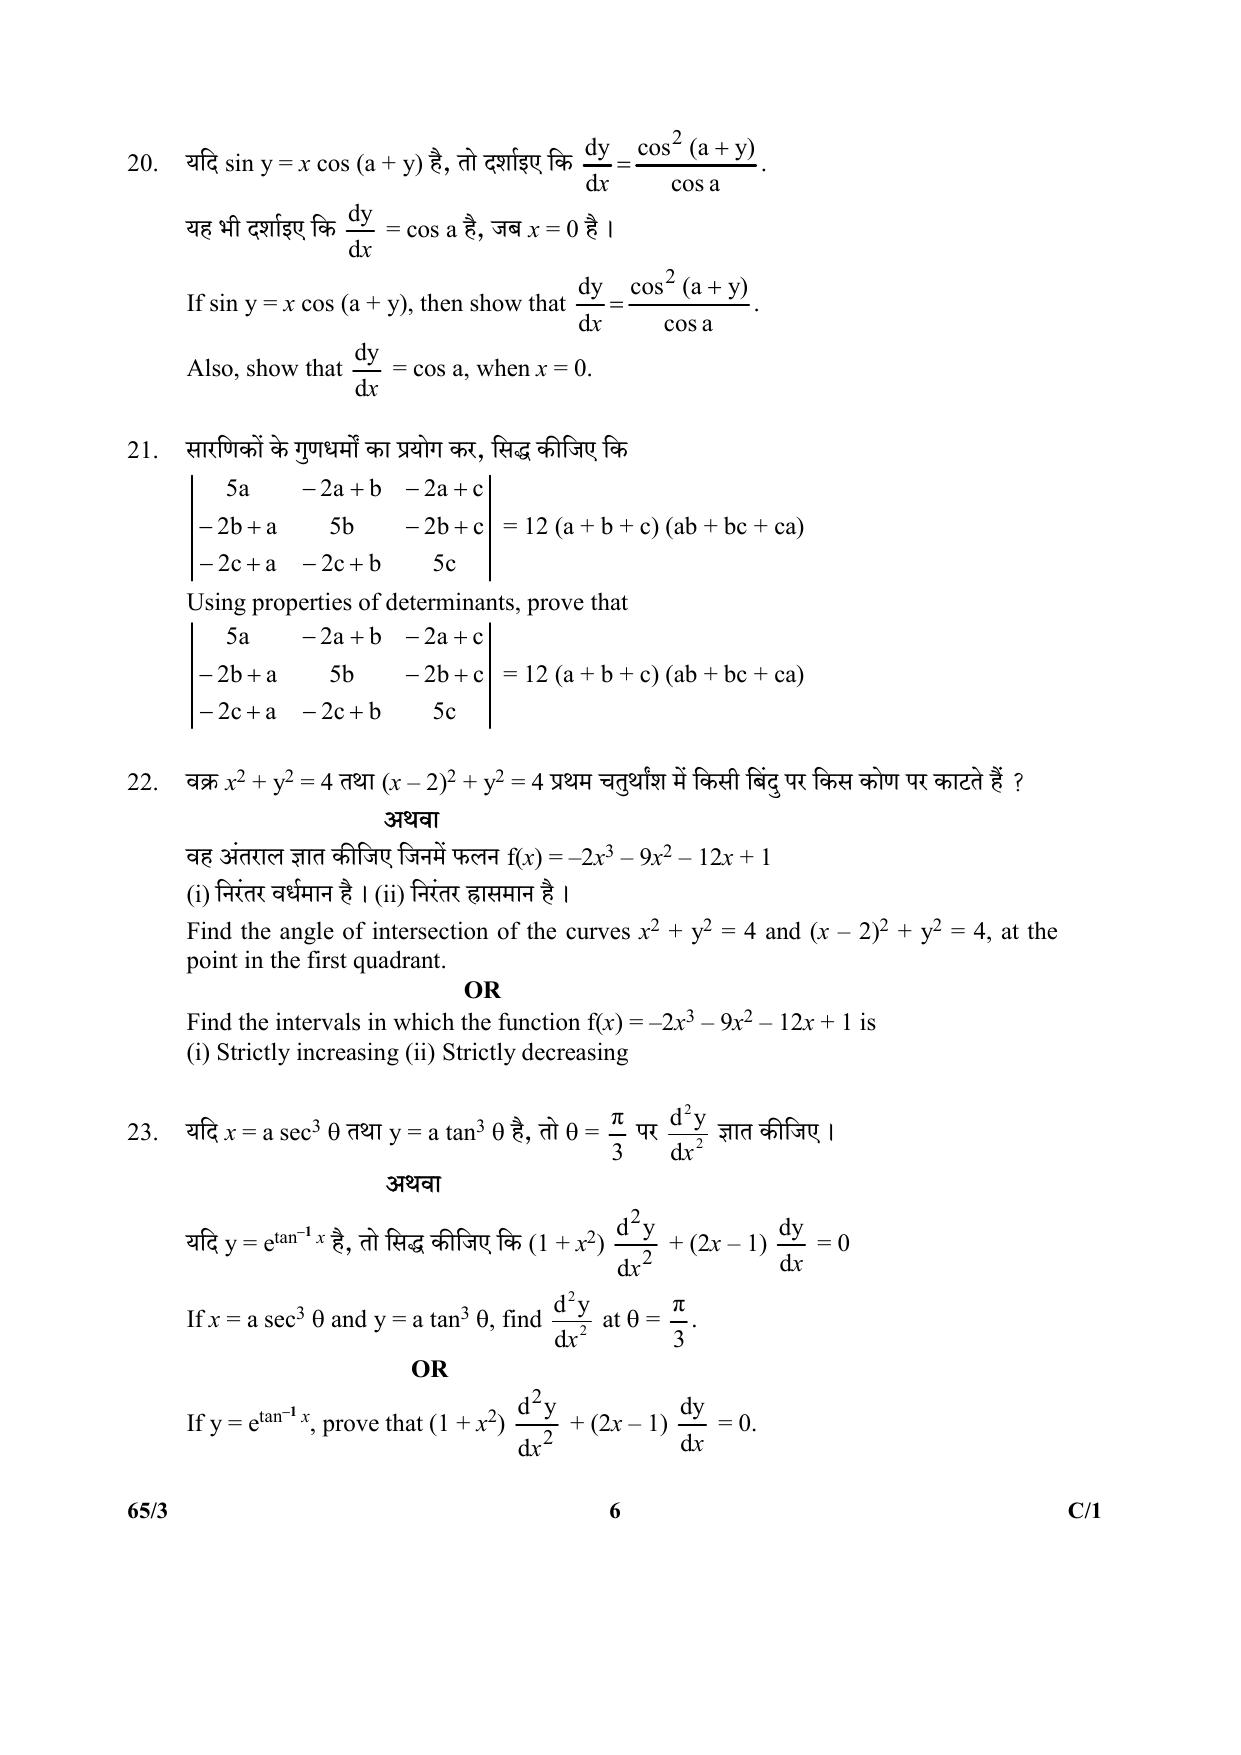 CBSE Class 12 65-3 (Mathematics) 2018 Compartment Question Paper - Page 6